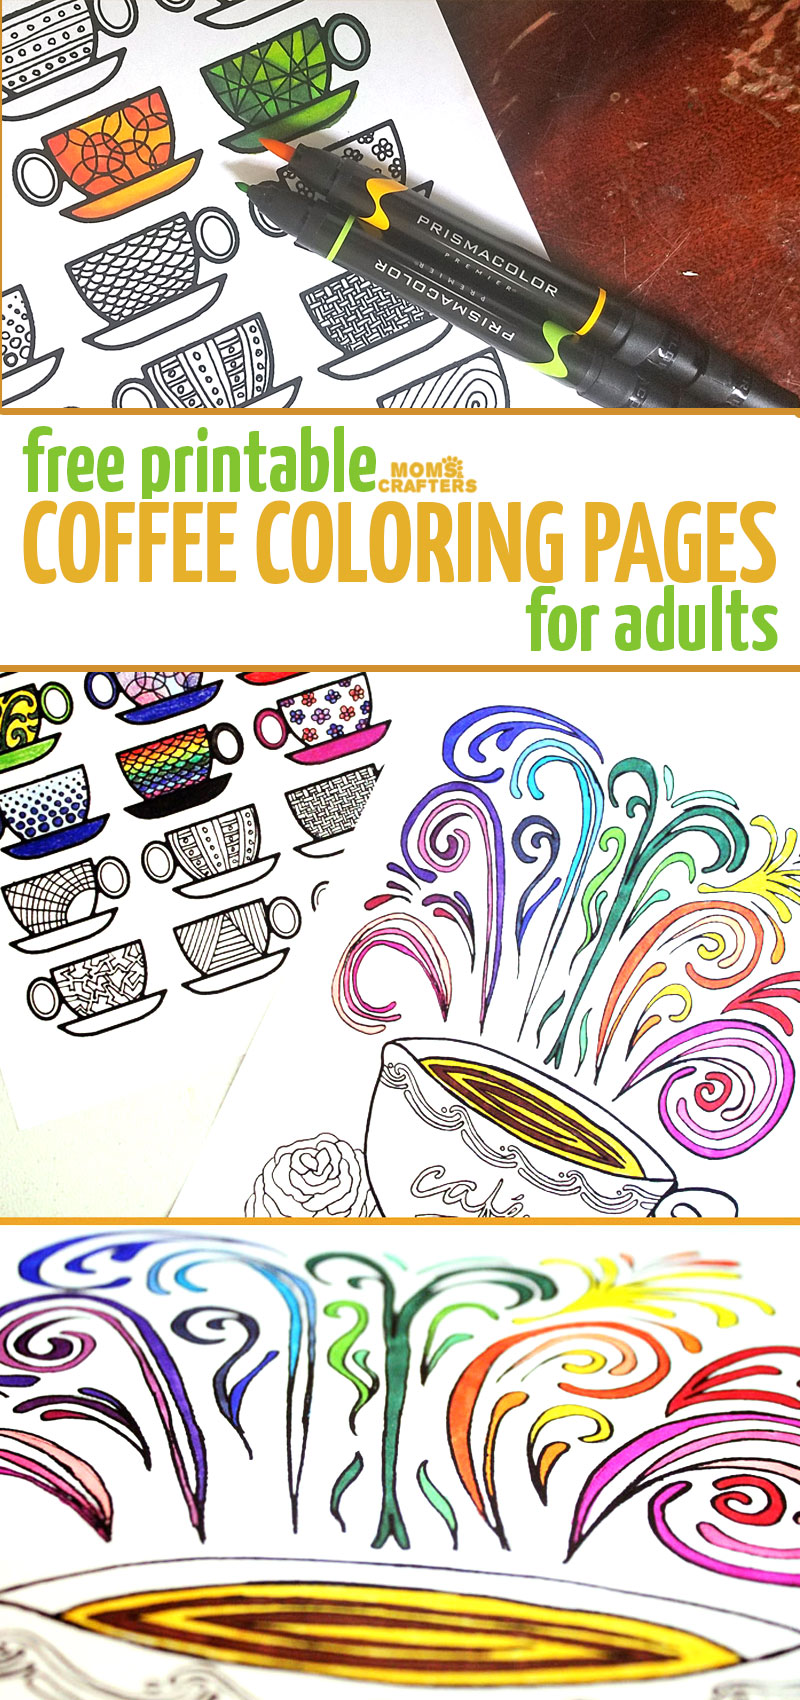 I love these coloring pages for adults in a coffee theme! The best part - they're free! I colored these free printable adult coloring pages TWICE because they are so relaxing and awesome. Click to get the high resolution hand drawn PDF coloring pages.